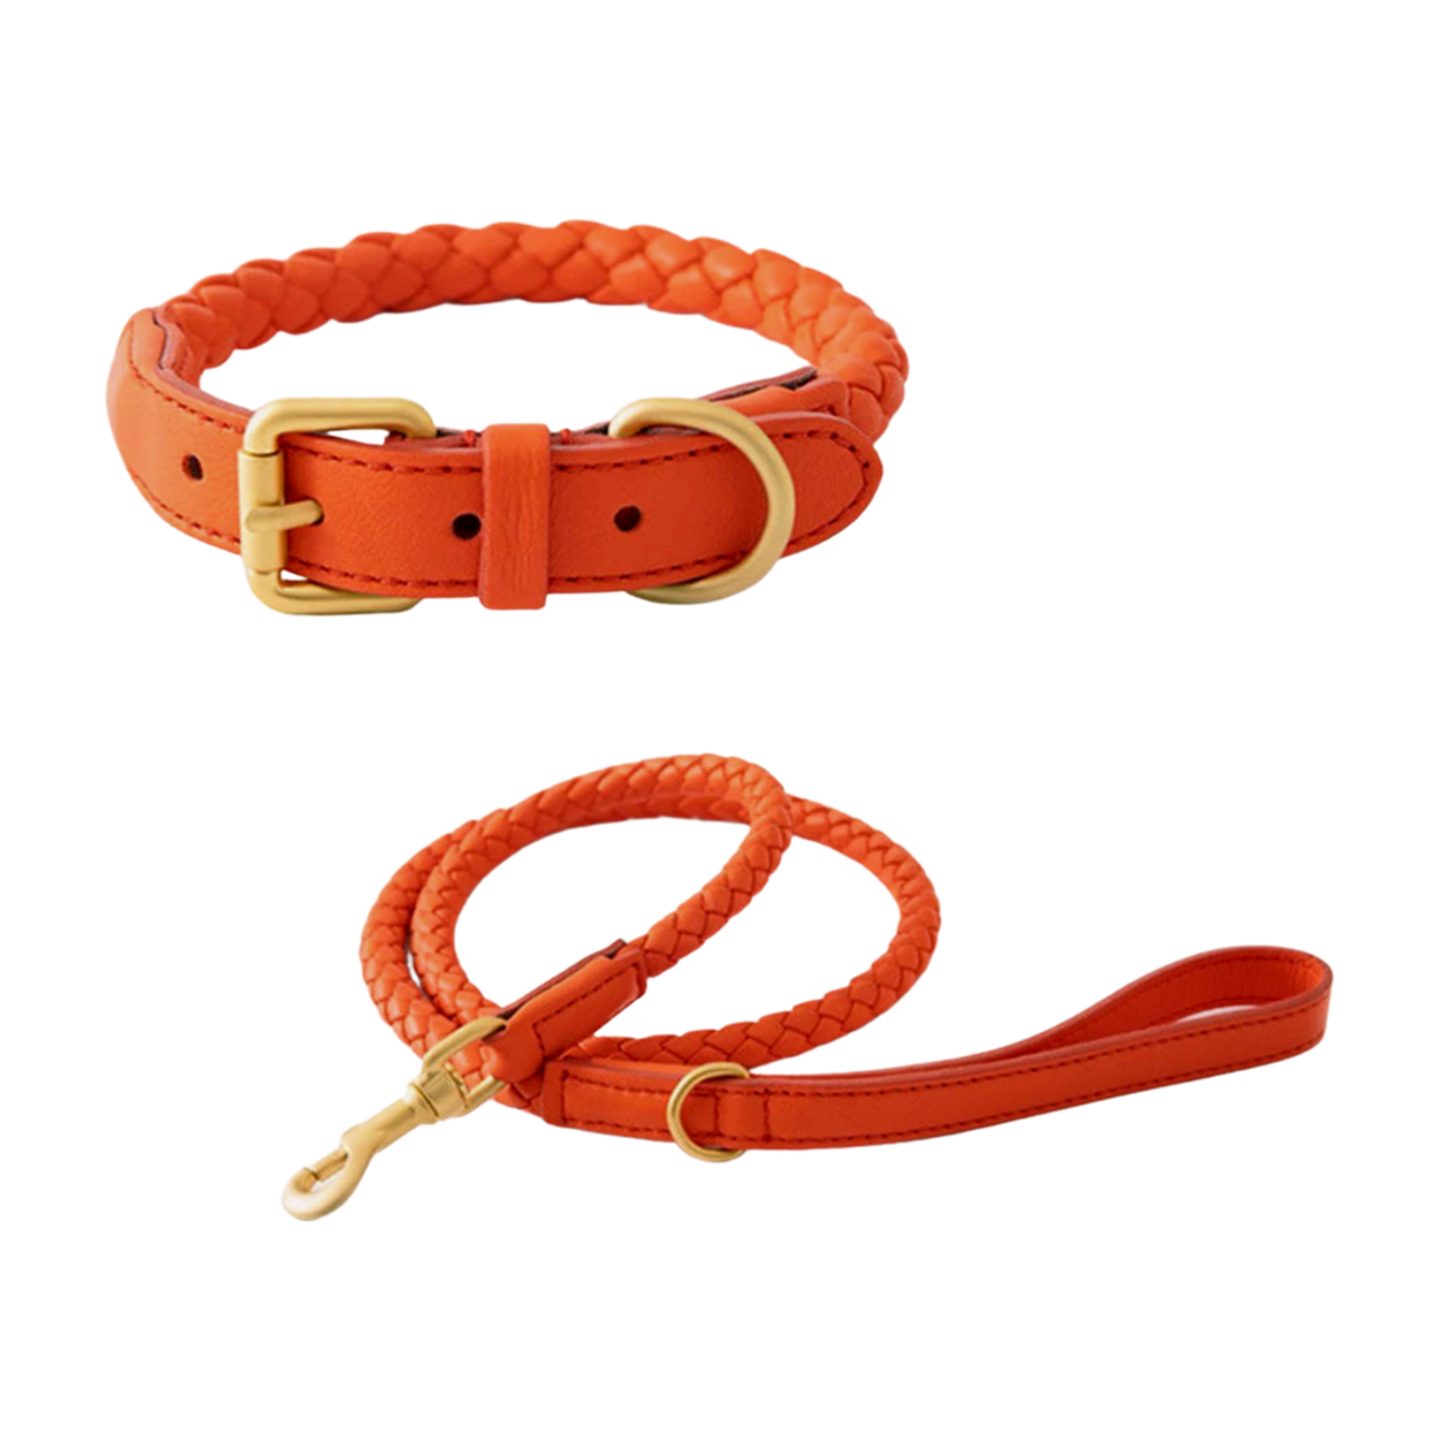 braided-leather-dog-leash-and-collar